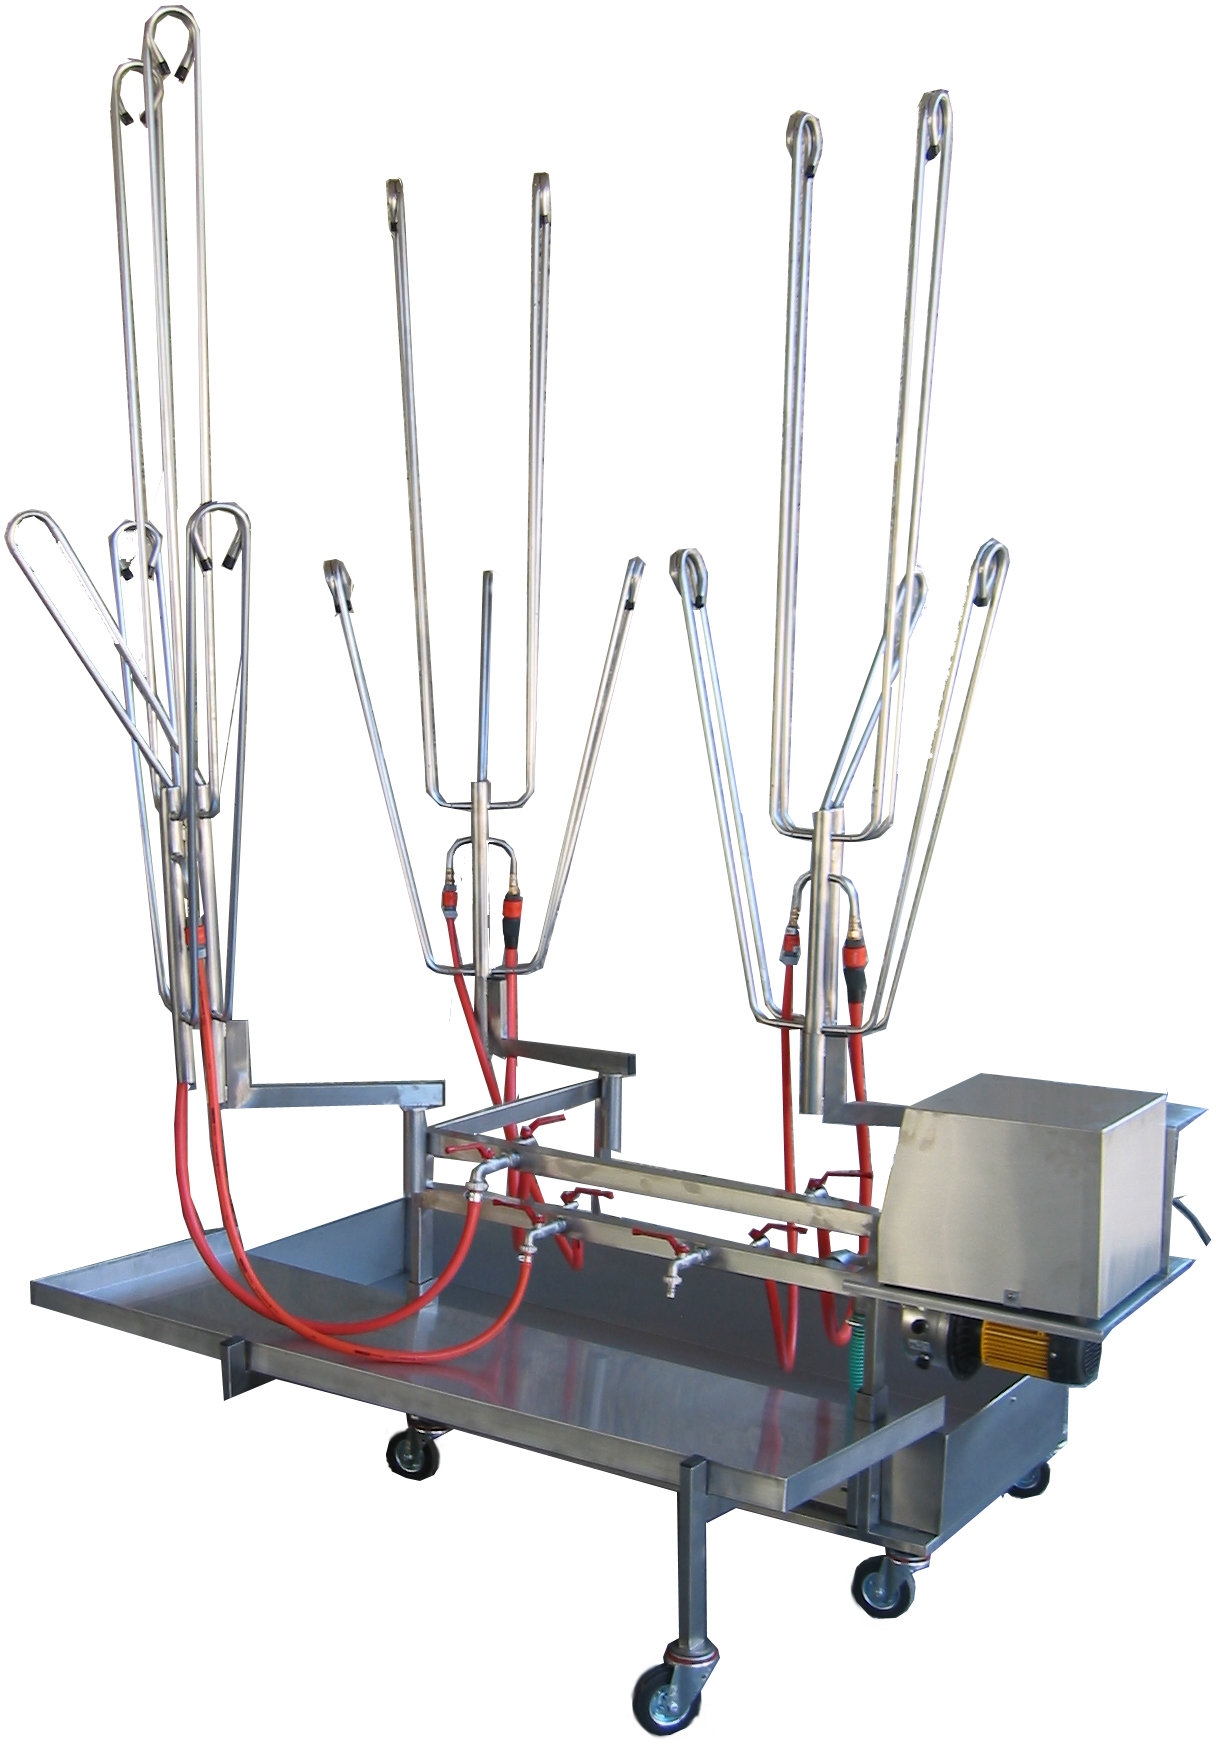 Modular and mobile washing, disinfecting and drying station